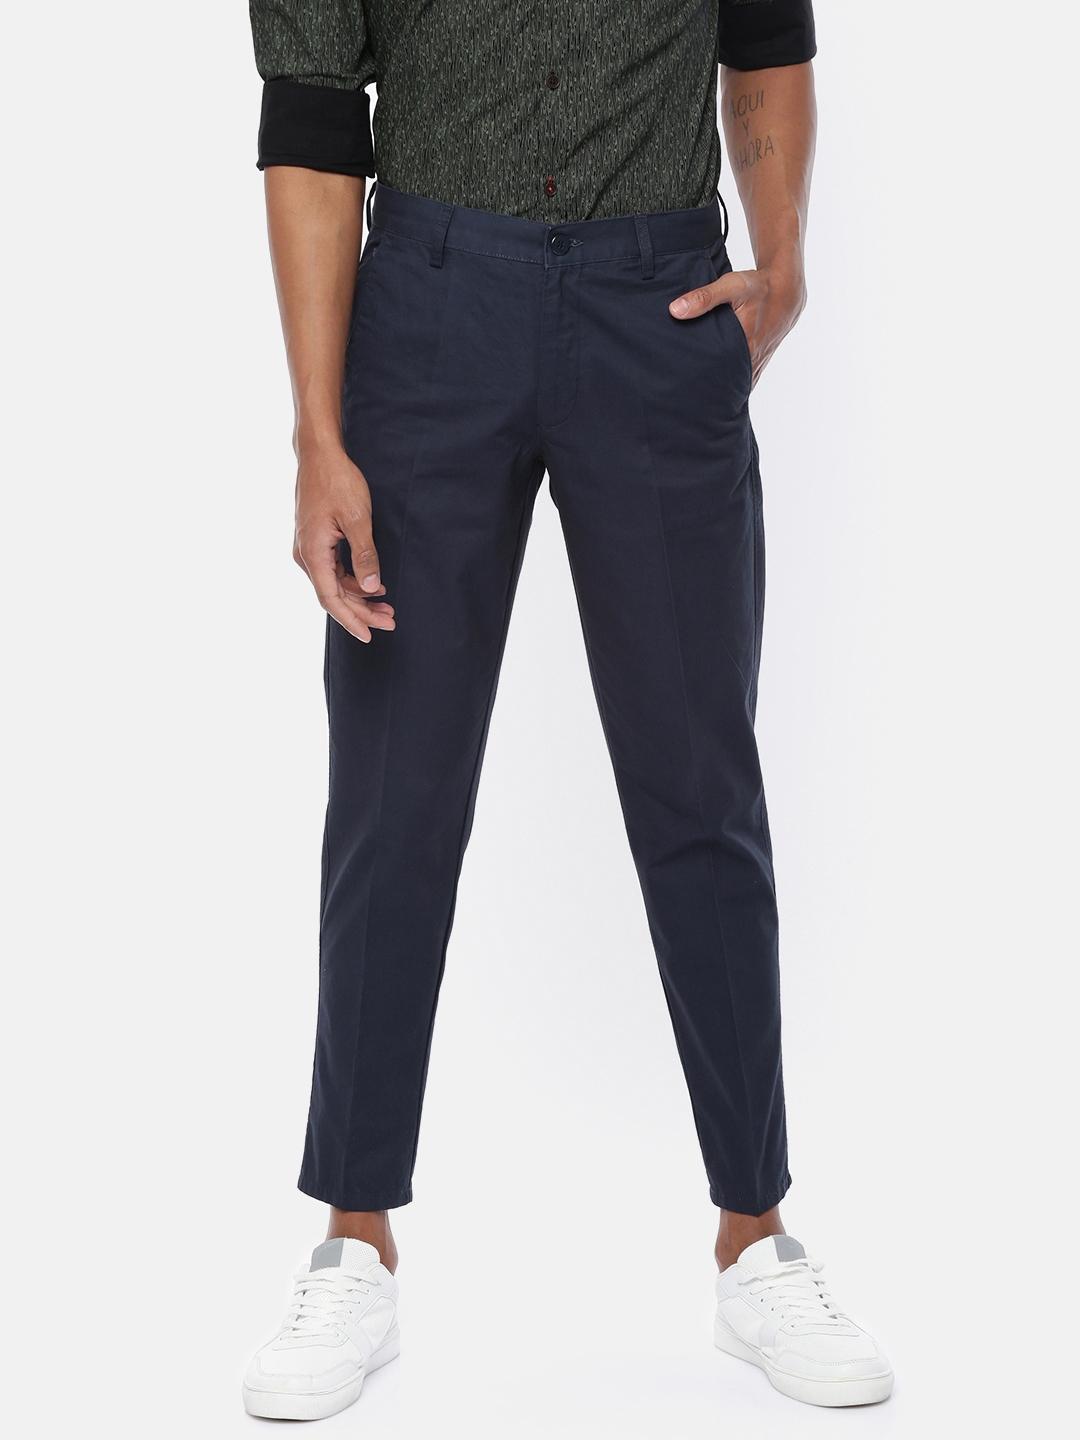 Buy Men Navy Solid Carrot Fit Casual Trousers Online  808071  Peter  England